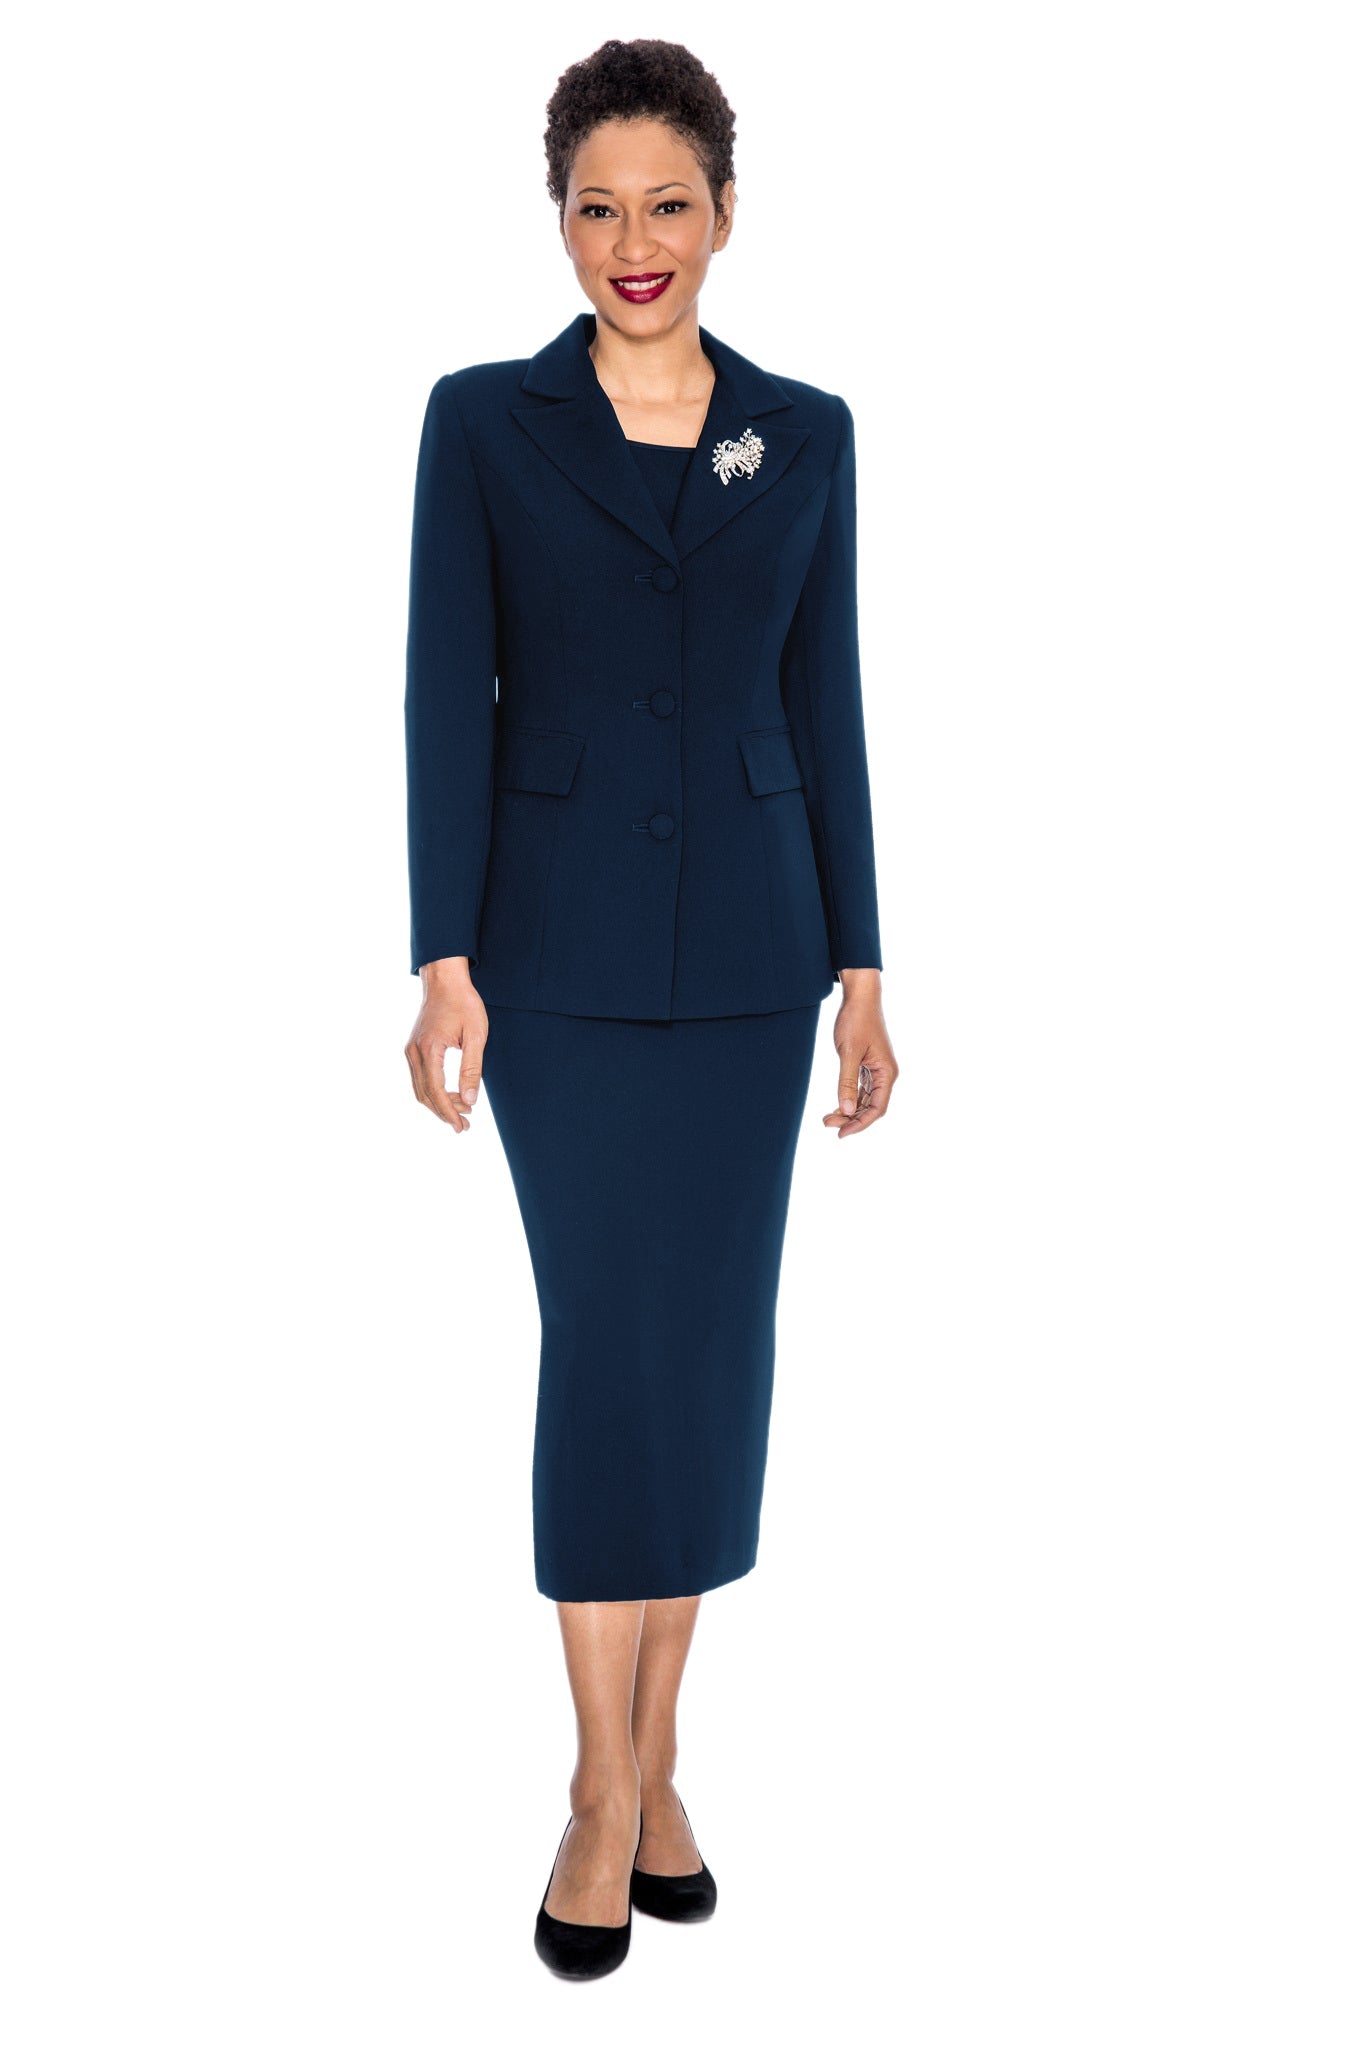 Giovanna Usher Suit 0655C-Navy - Church Suits For Less